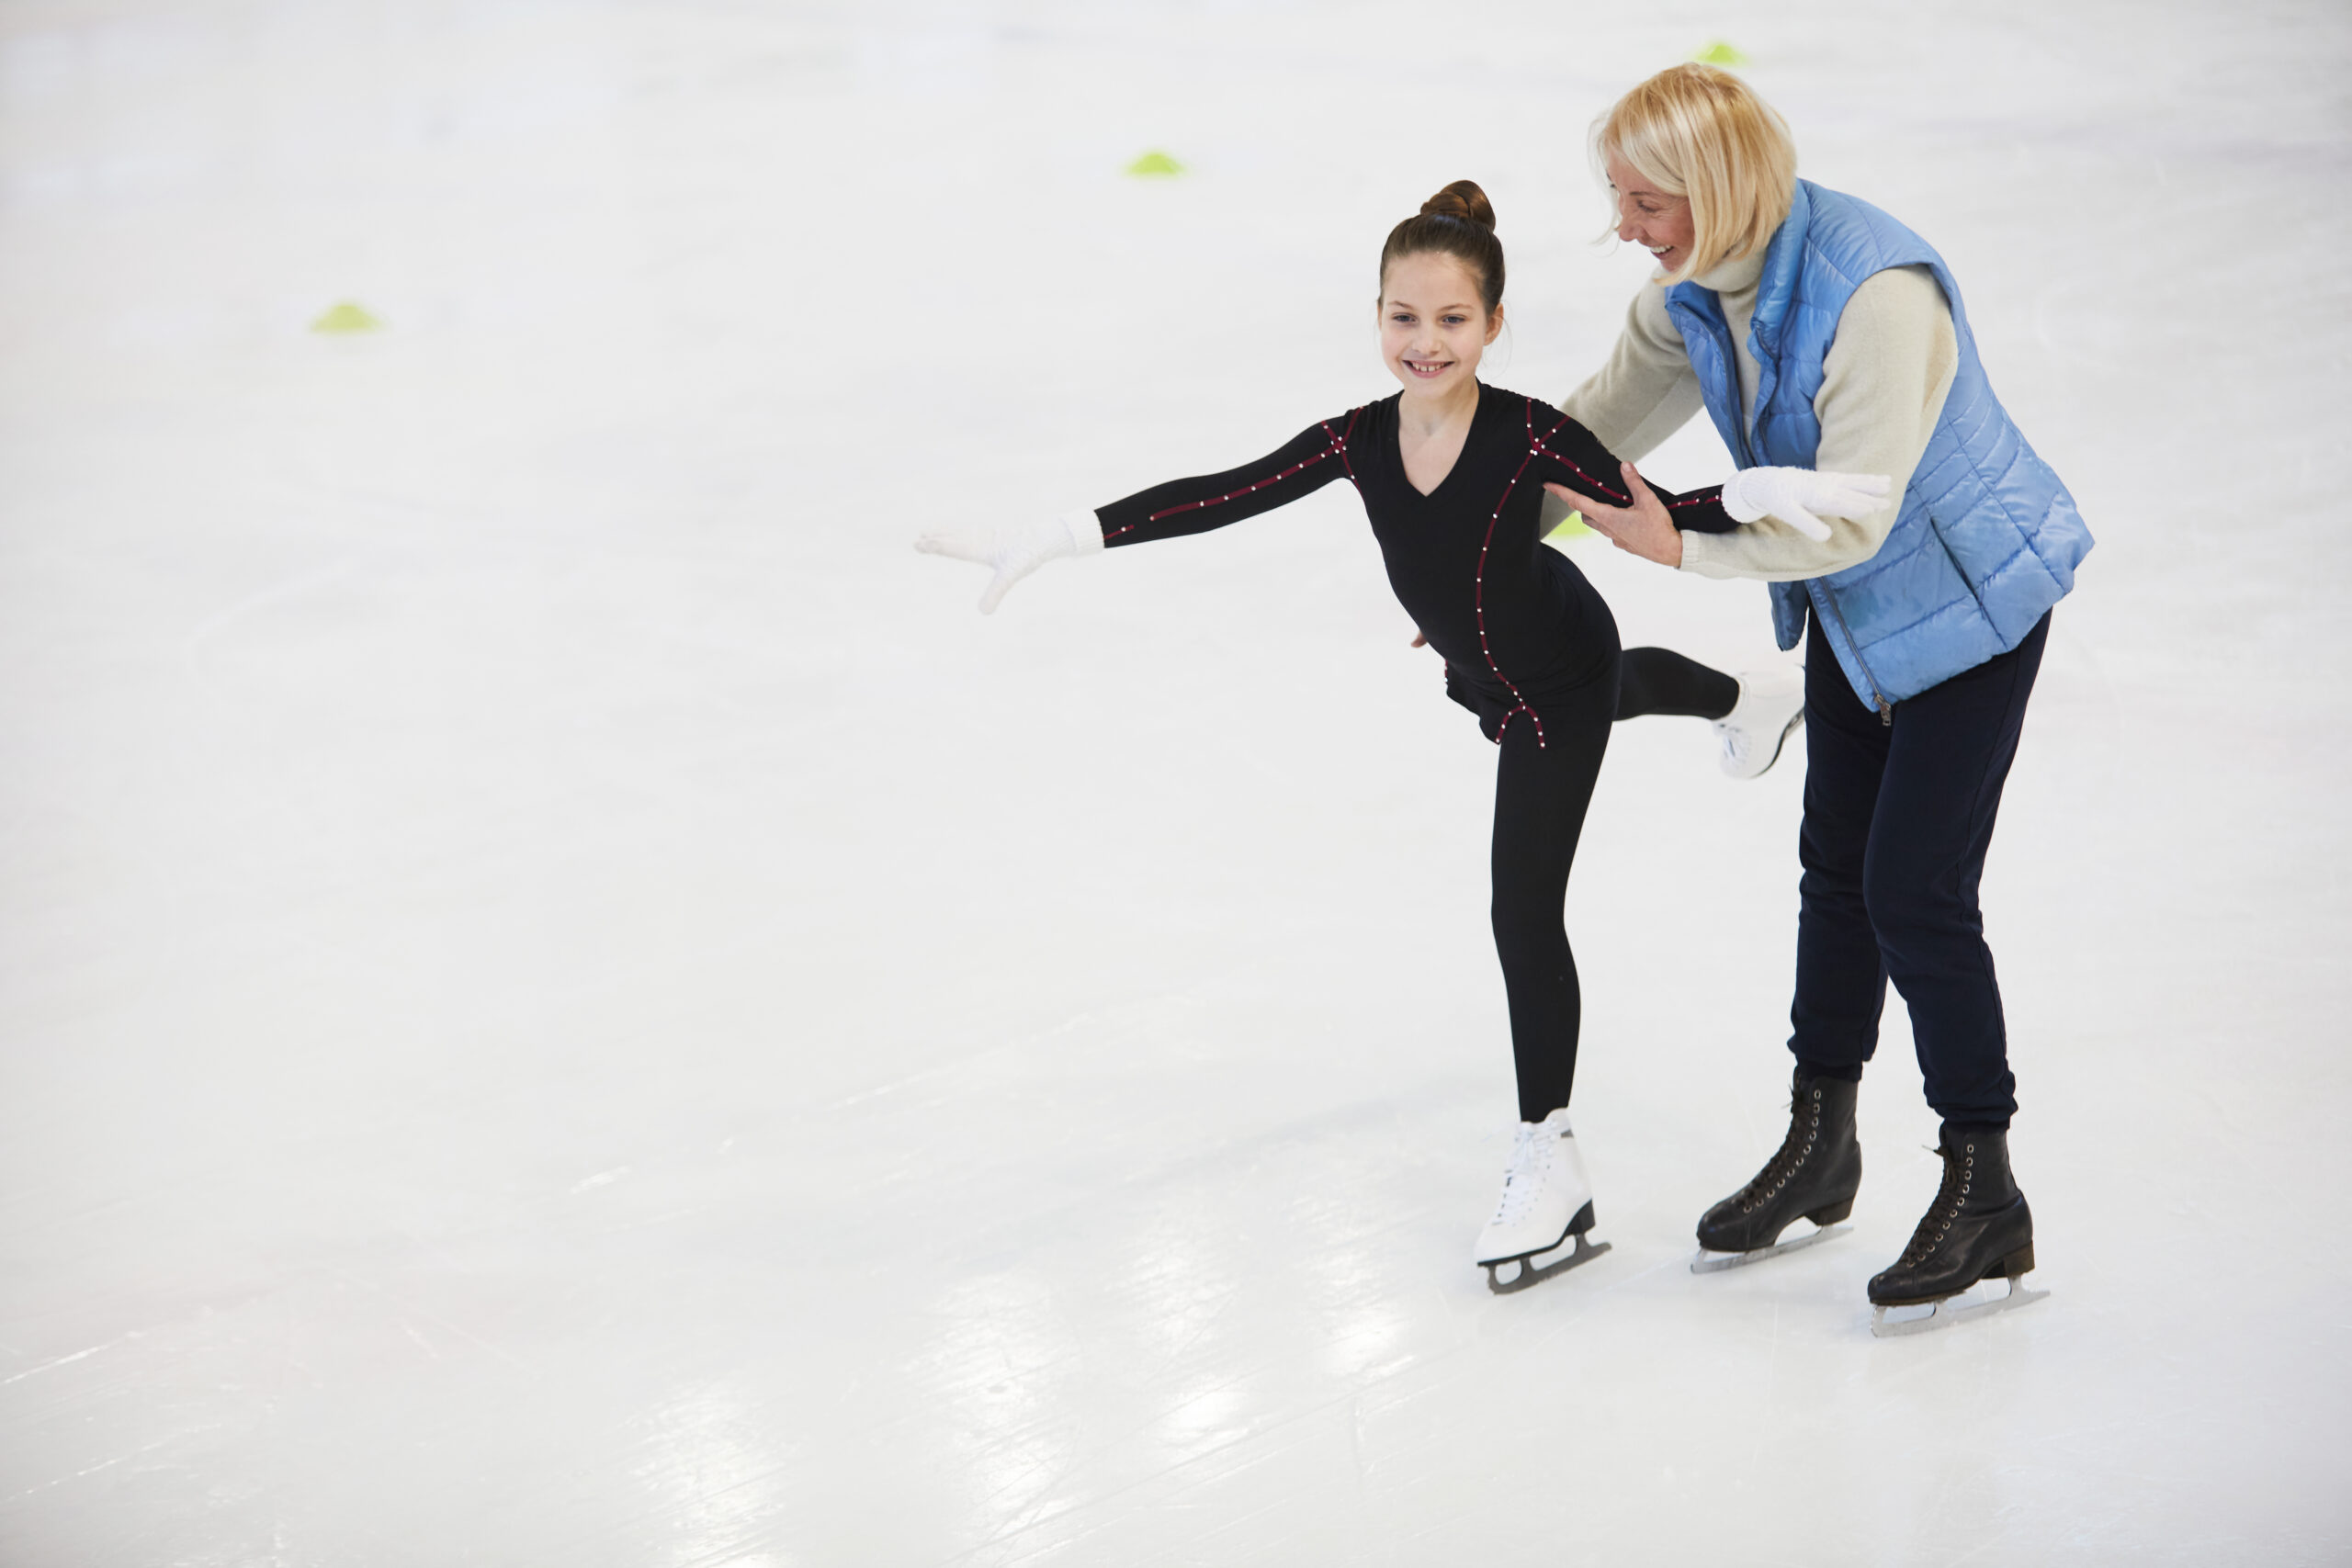 Full length portrait of senior coach helping little girl figure skating on rink, copy space